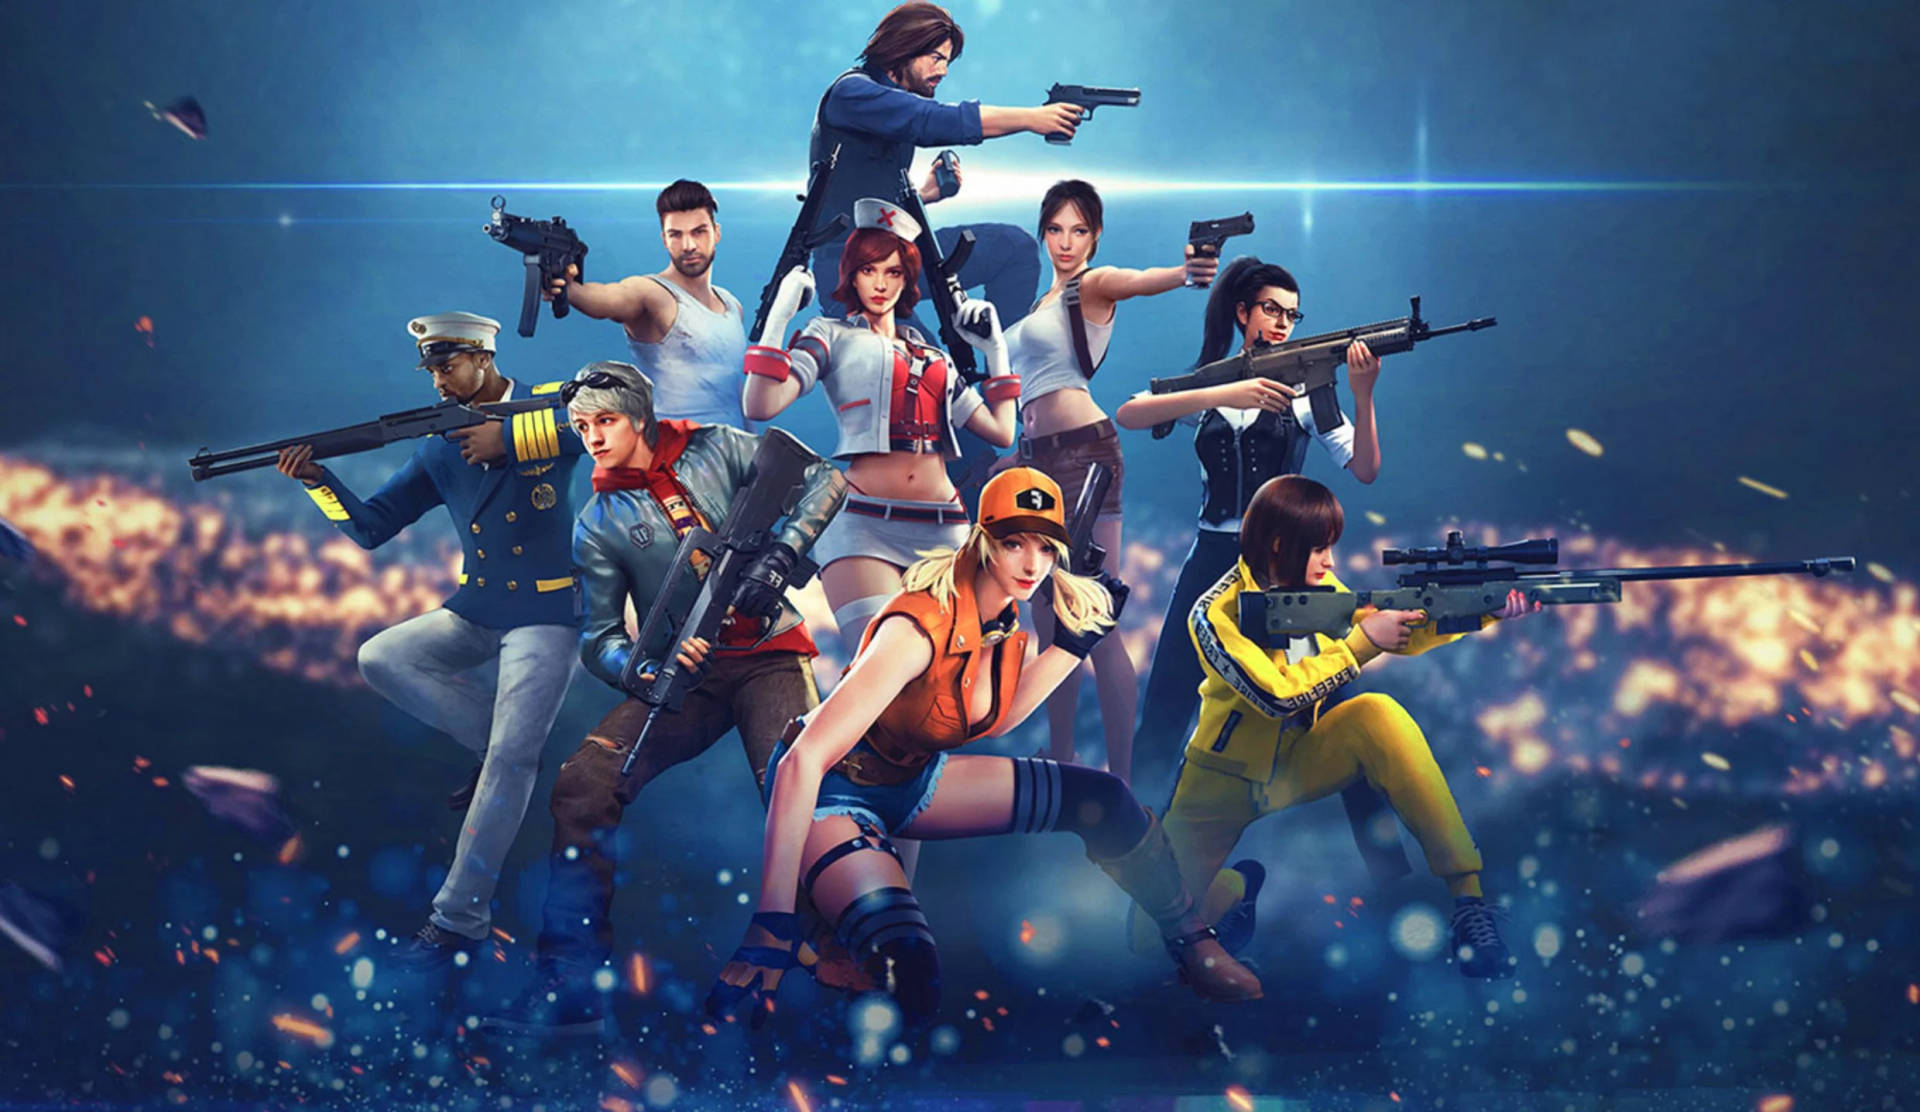 Free Free Fire Wallpaper Downloads, [500+] Free Fire Wallpapers for FREE |  